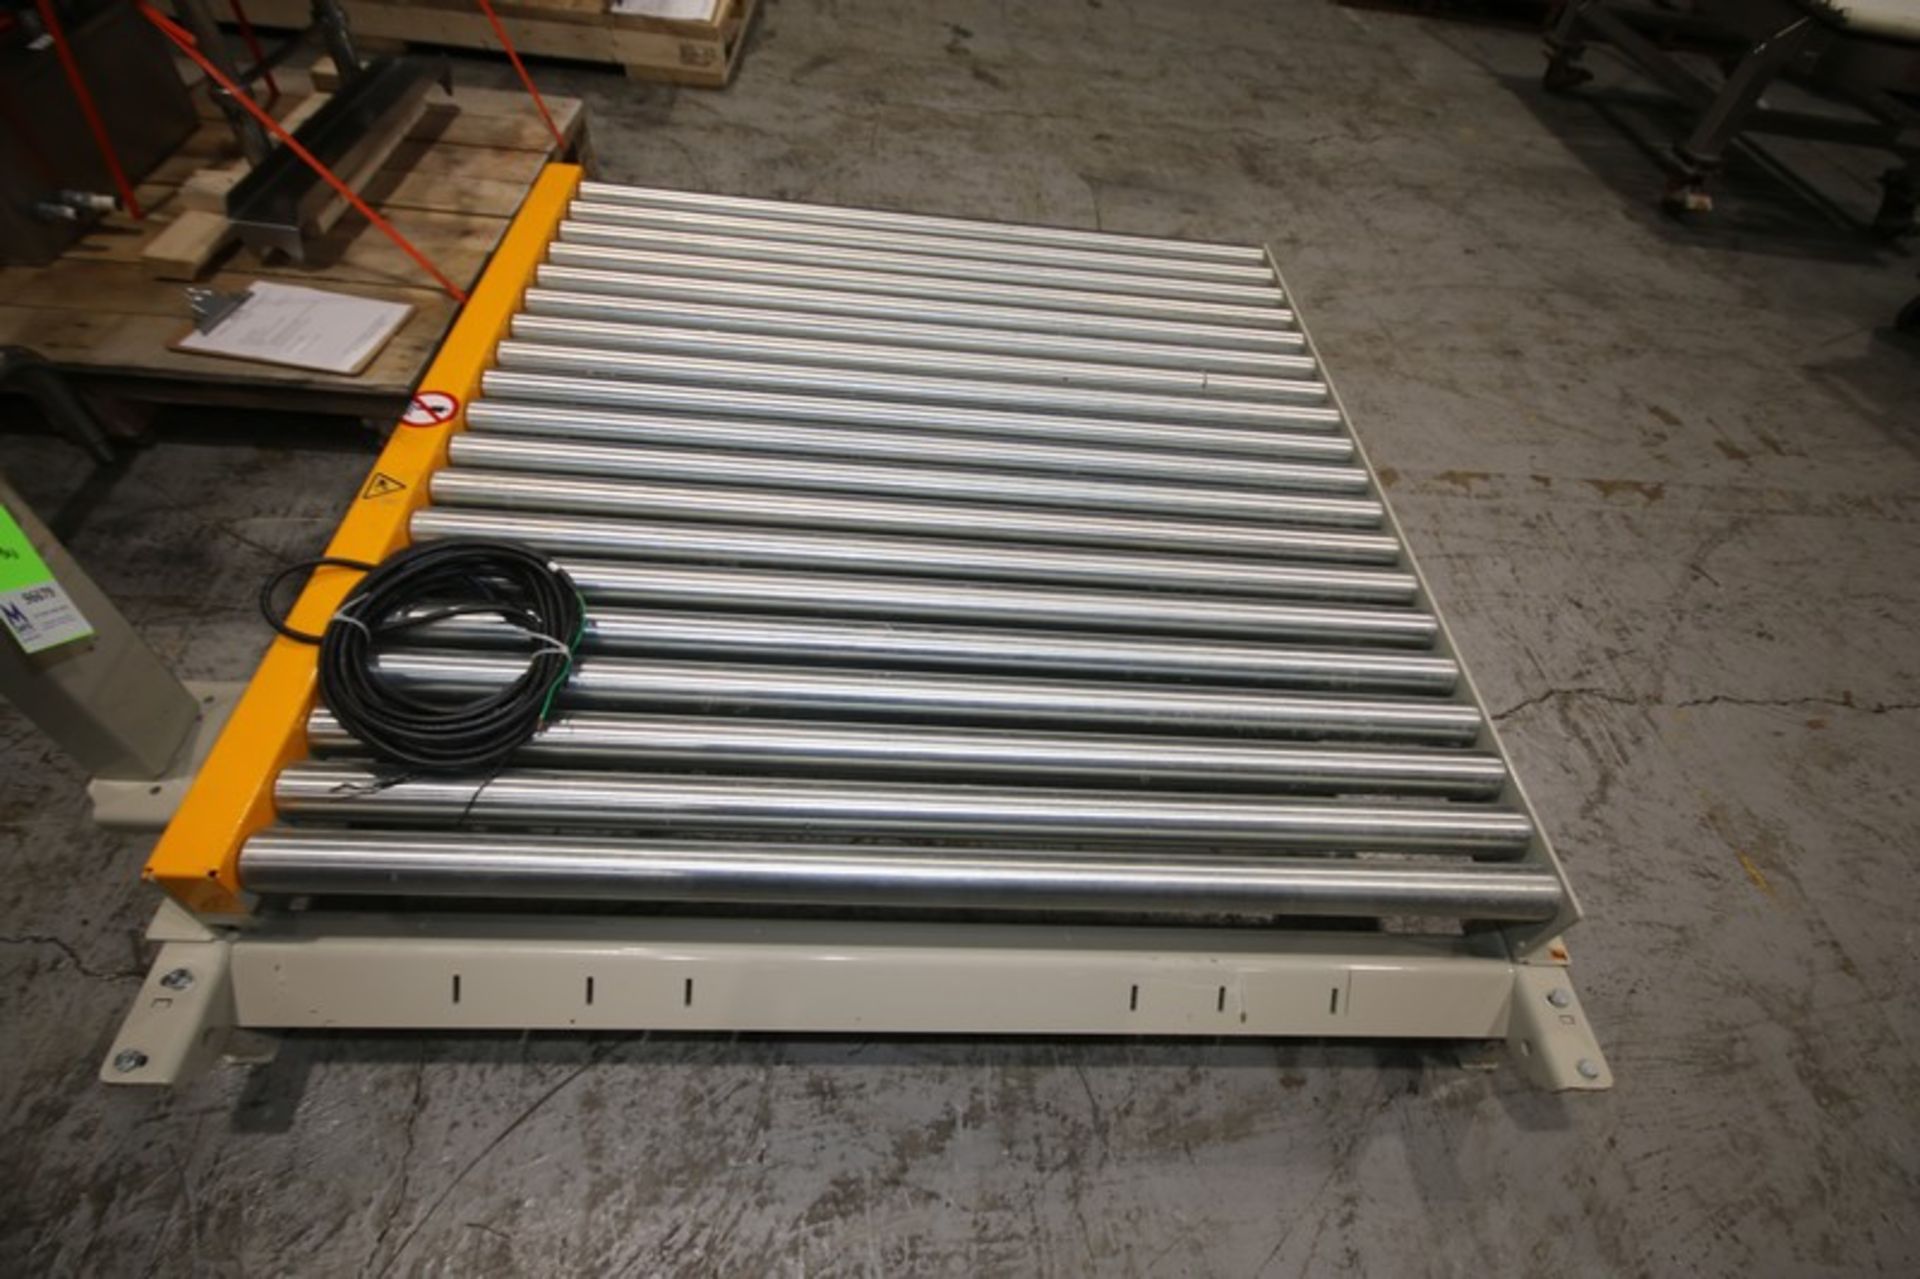 57" L x 52" W x 13" H Powered Conveyor Bed with SEW Drive Motor, (Like New Condition) (INV#96679) ( - Image 2 of 4